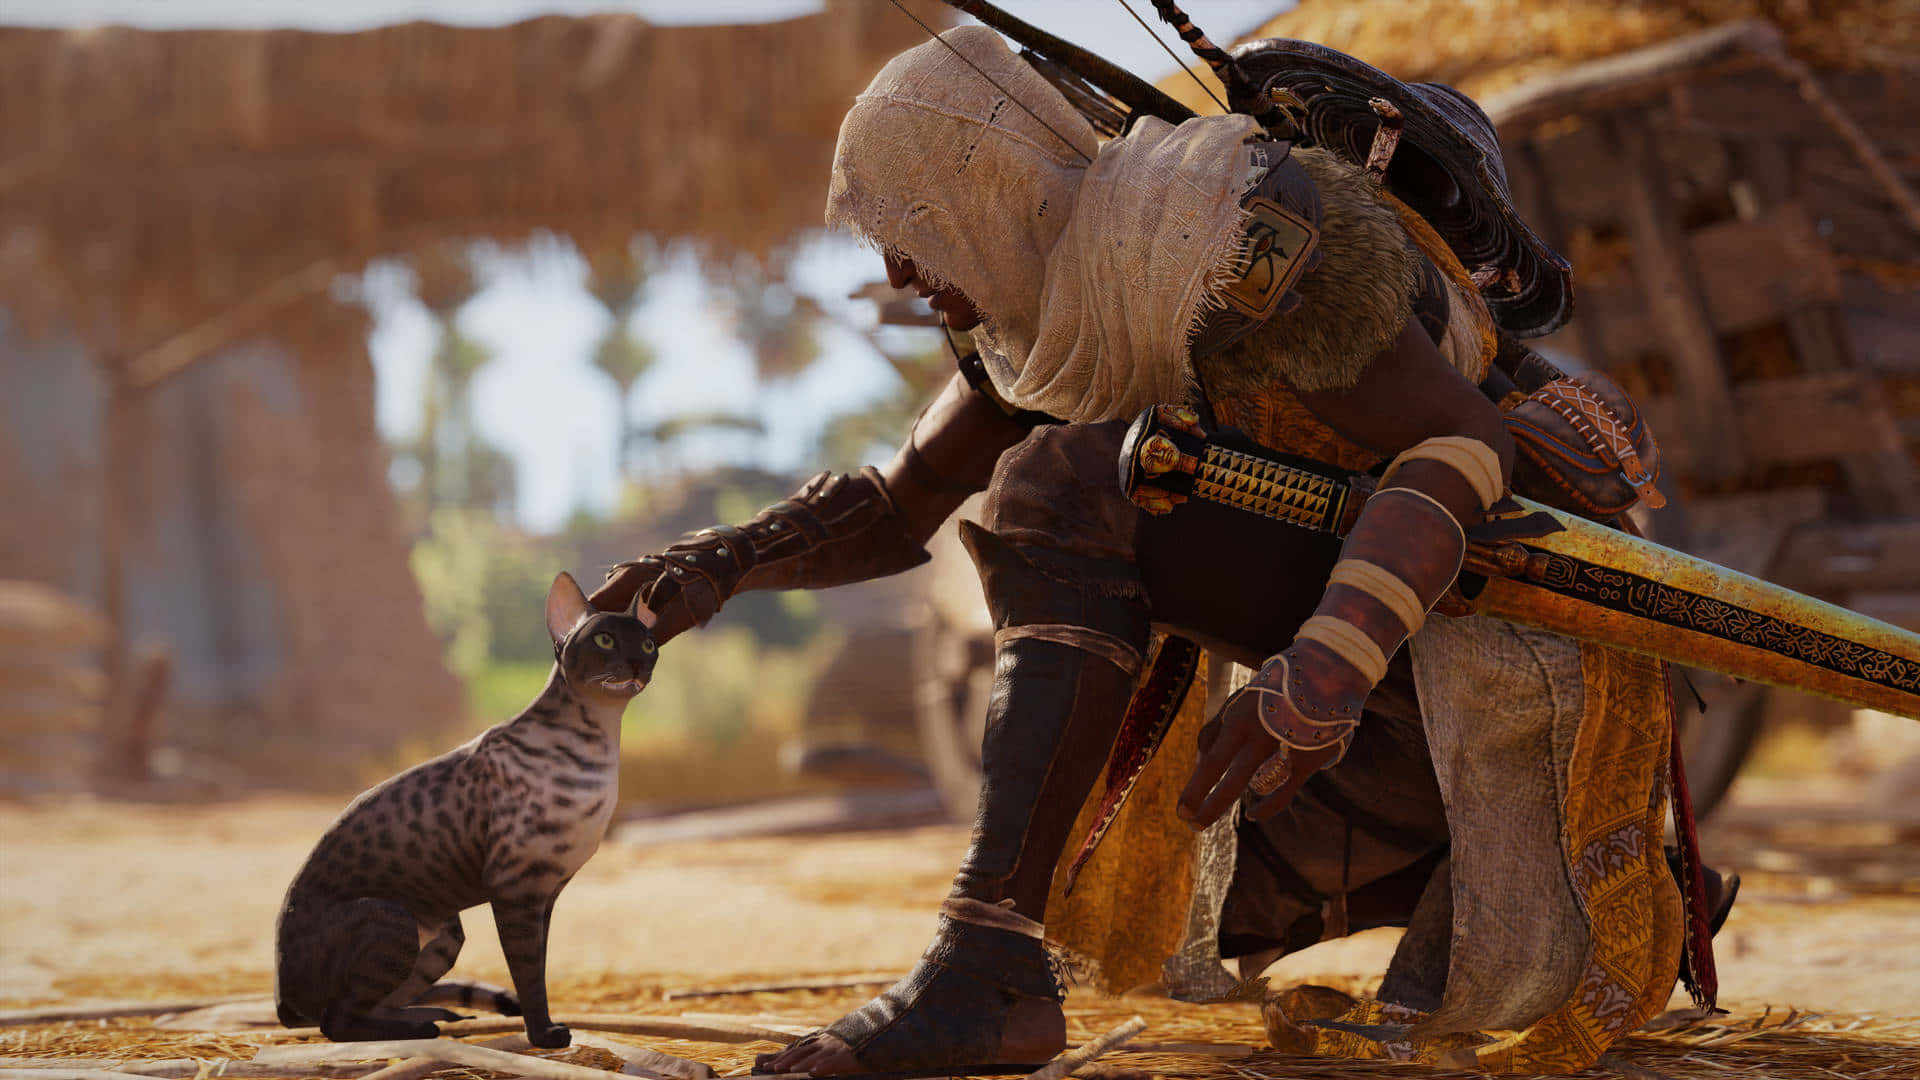 Bayek And Cat1920x1080 Assassin's Creed Origins Background